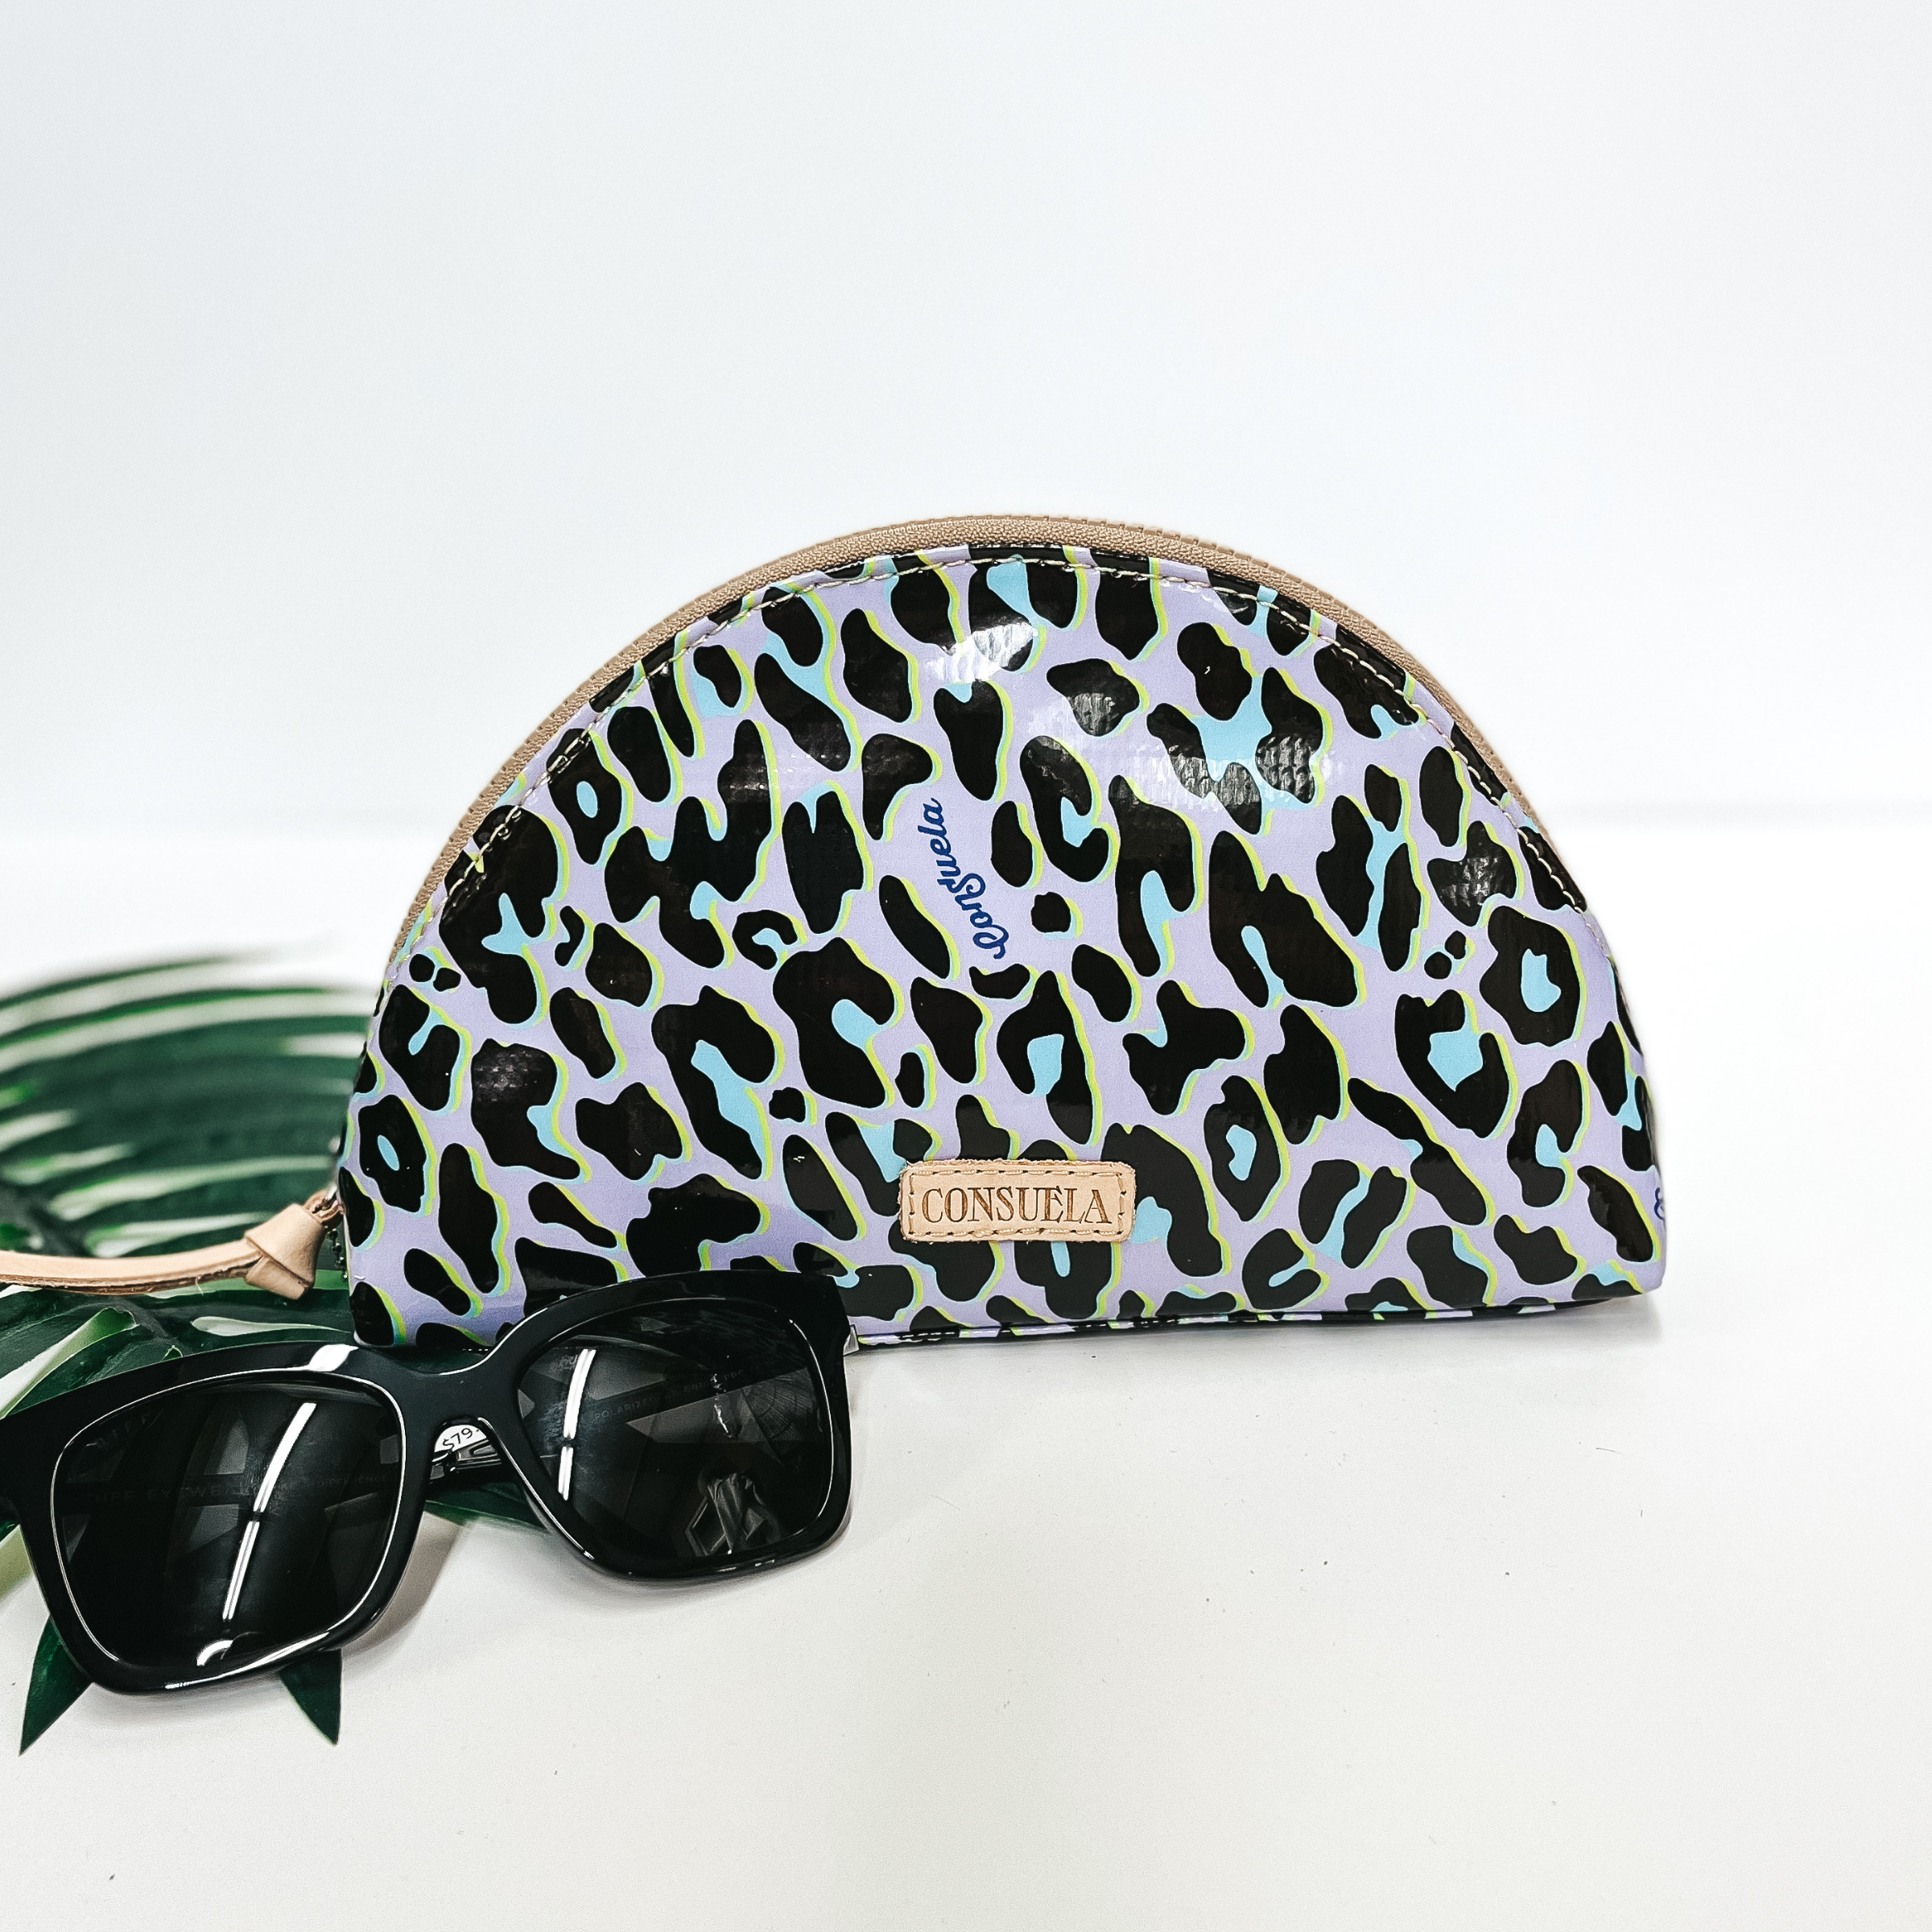 A purple leopard print dome cosmetic bag with leather zipper. Pictured on white background with a palm leaf and black sunglasses.